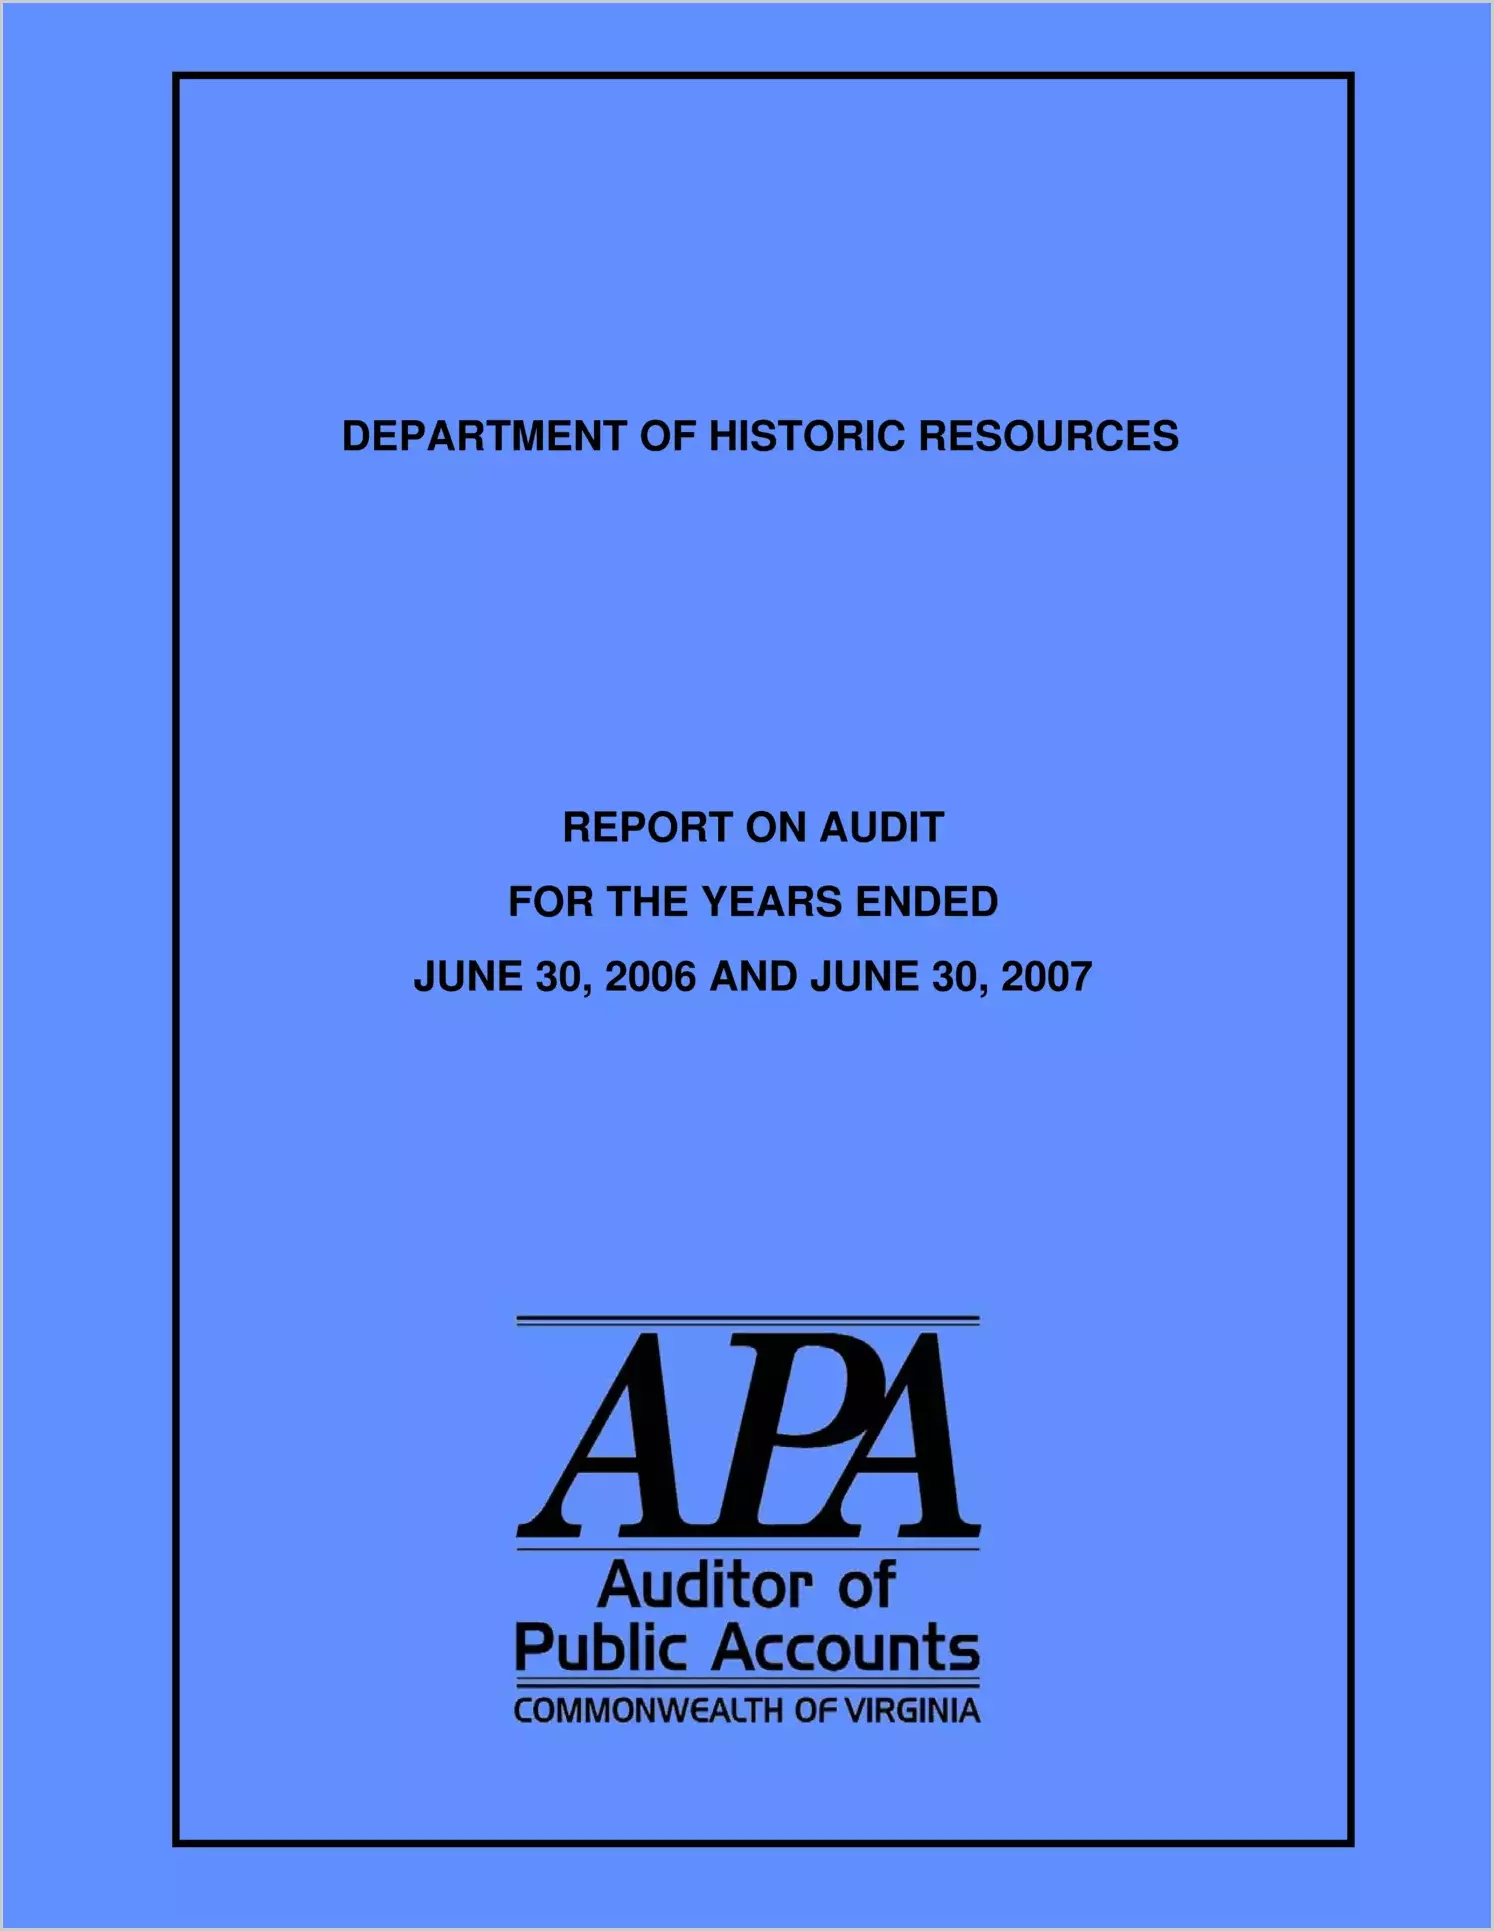 Department of Historic Resources, for the year ended June 30, 2006 and June 30, 2007